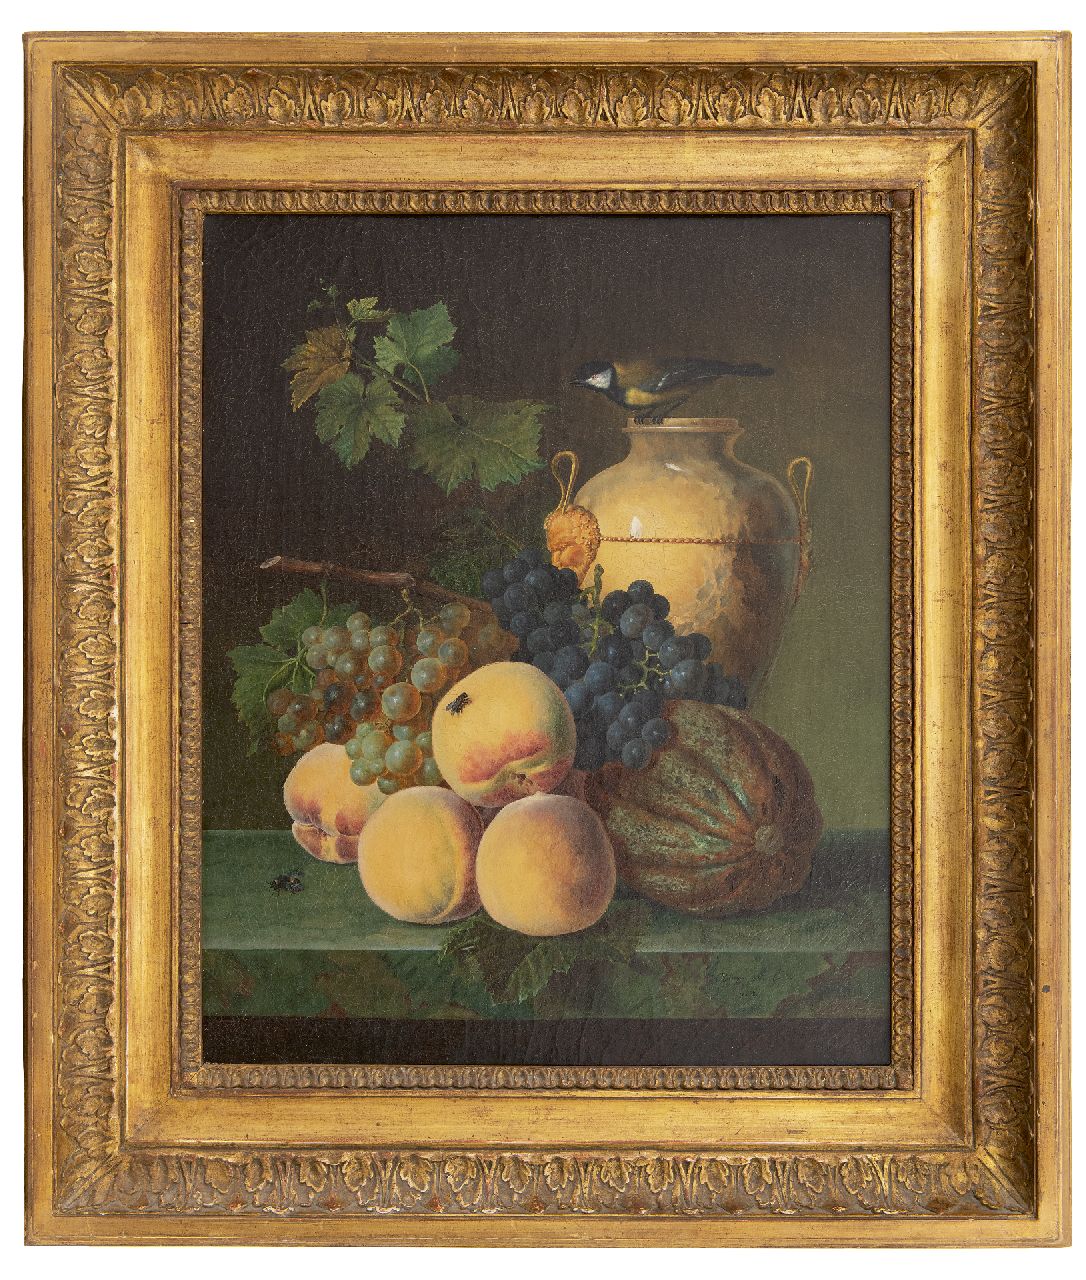 Génin O.M.  | Olympe Mouette Génin | Paintings offered for sale | A still life with peaches, an amphora and a bird, oil on canvas 49.0 x 39.9 cm, signed l.r. and dated 1818